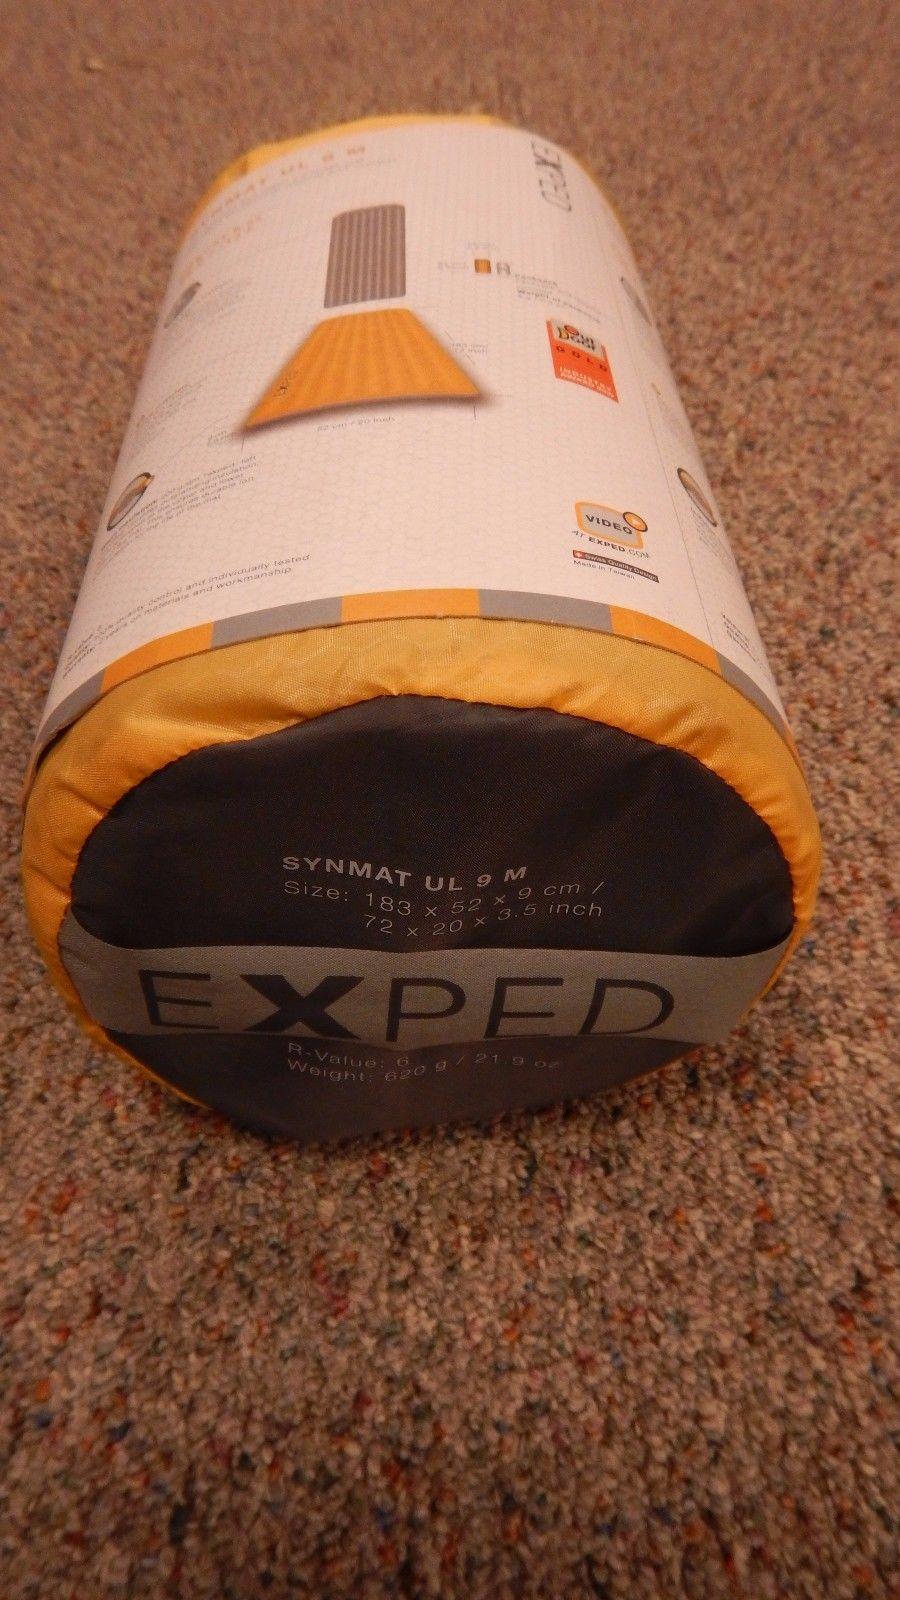 Exped 就寝用マット